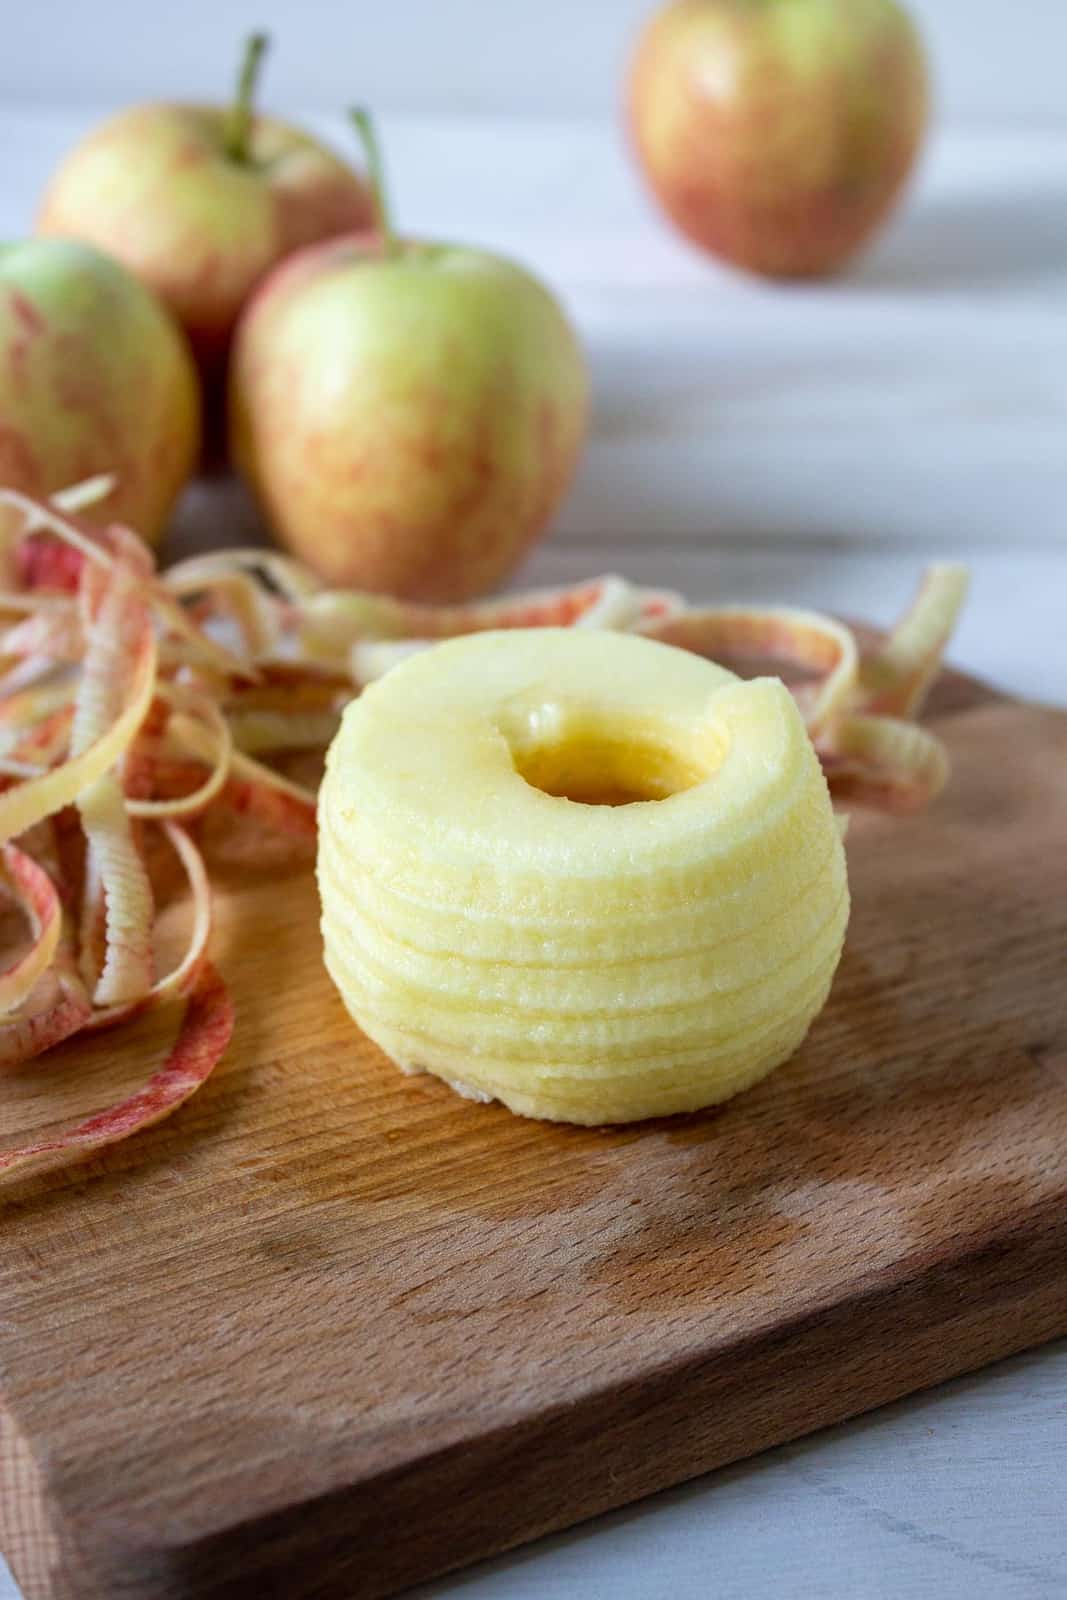 A peeled and cored apple on a small wooden cutting board.